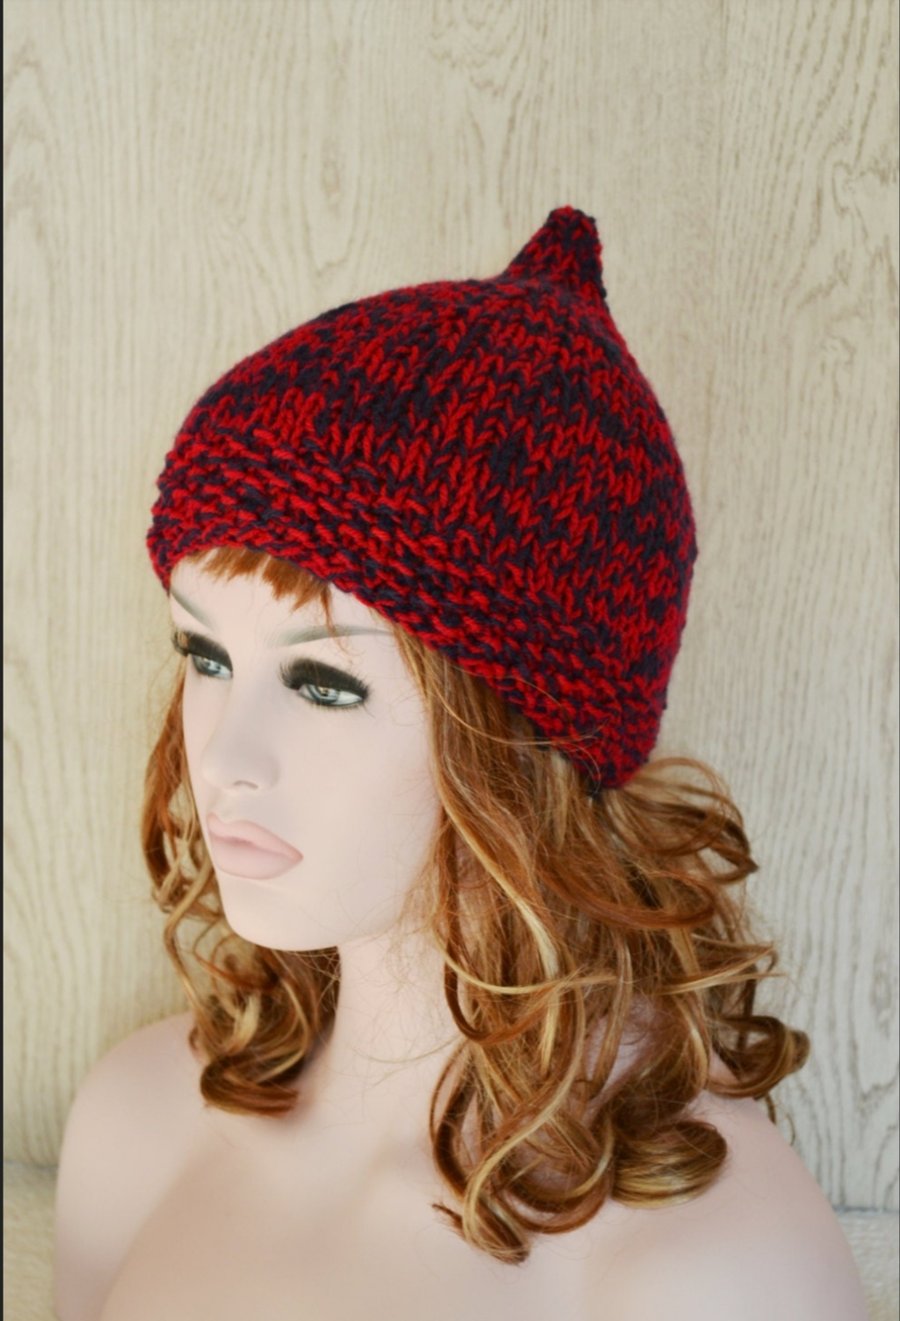 Hat Pixie Hat Knitted Hat Elf Chunky,